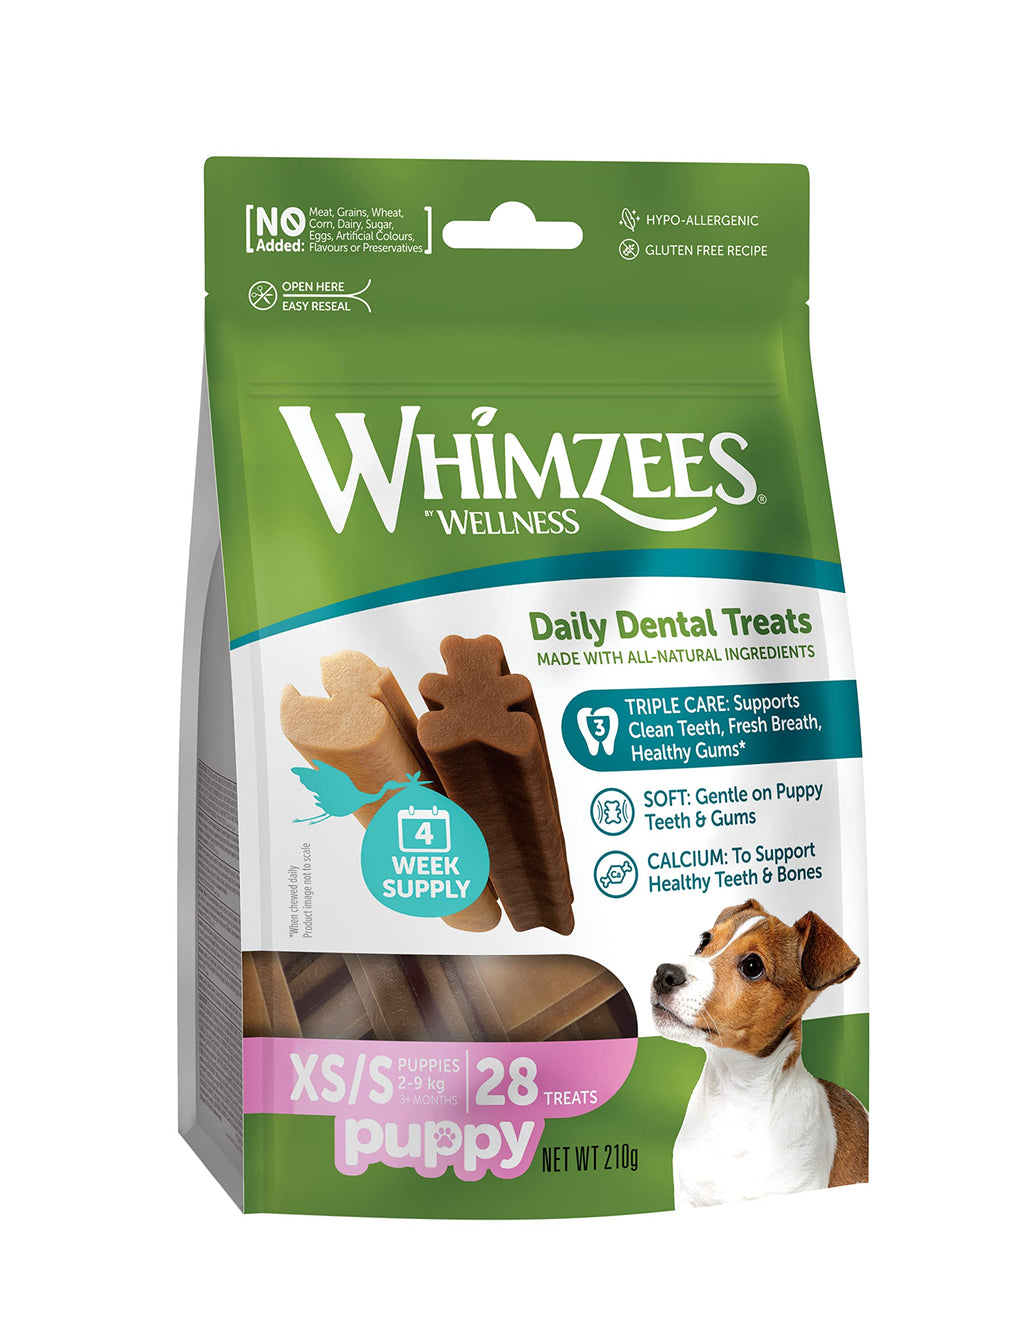 WHIMZEES Puppy Stix, Natural and Grain Free Dog Chews, Puppy Dental Sticks, 28 Pieces, Size XS/S 28 g (Pack of 1) Extra Small to Small Breed (2-9kg)